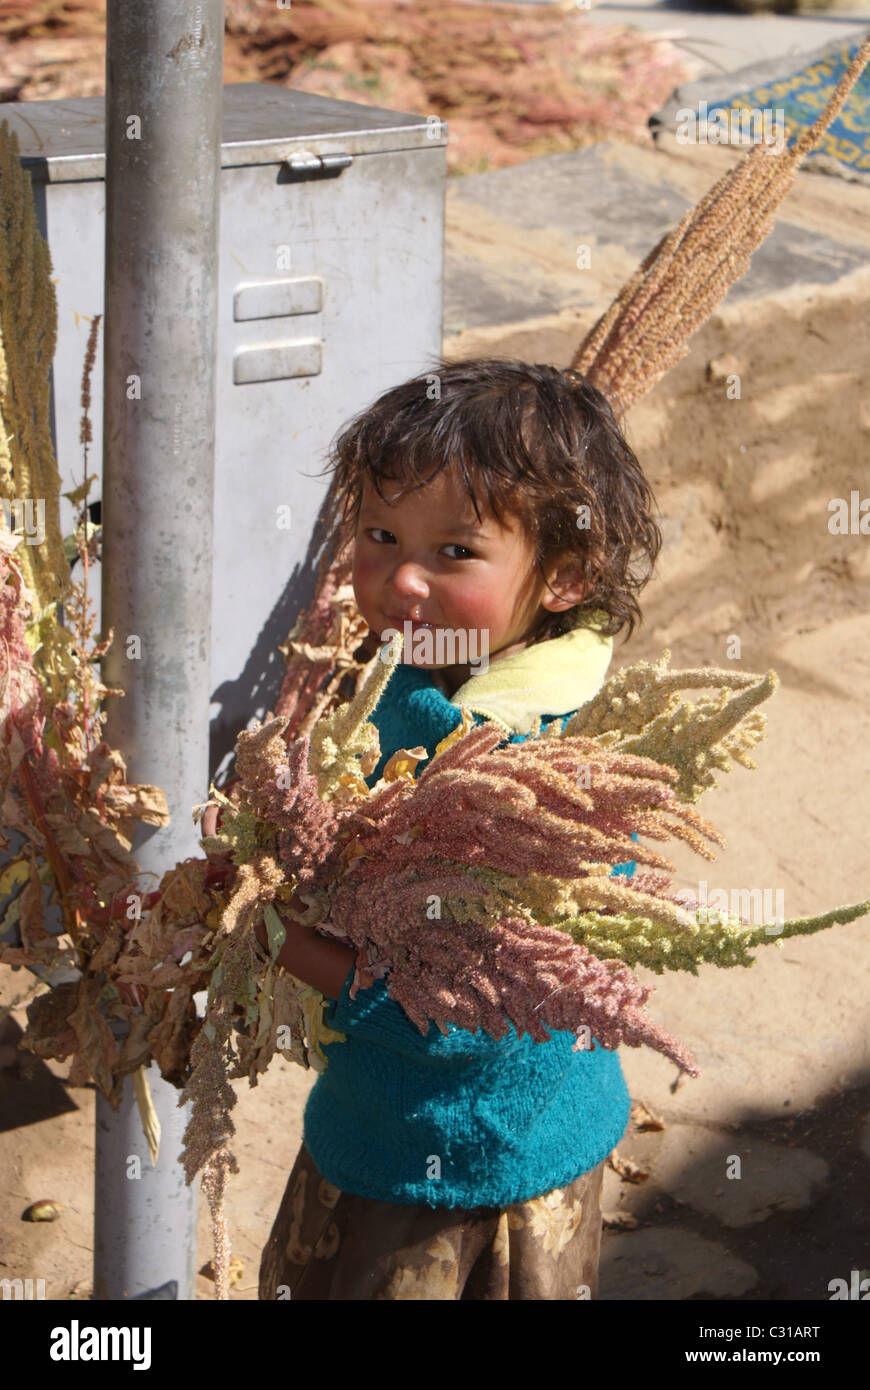 Garhwal Himalayas, India: A child helps out with the amaranthus harvest in the village of Tolma. Stock Photo